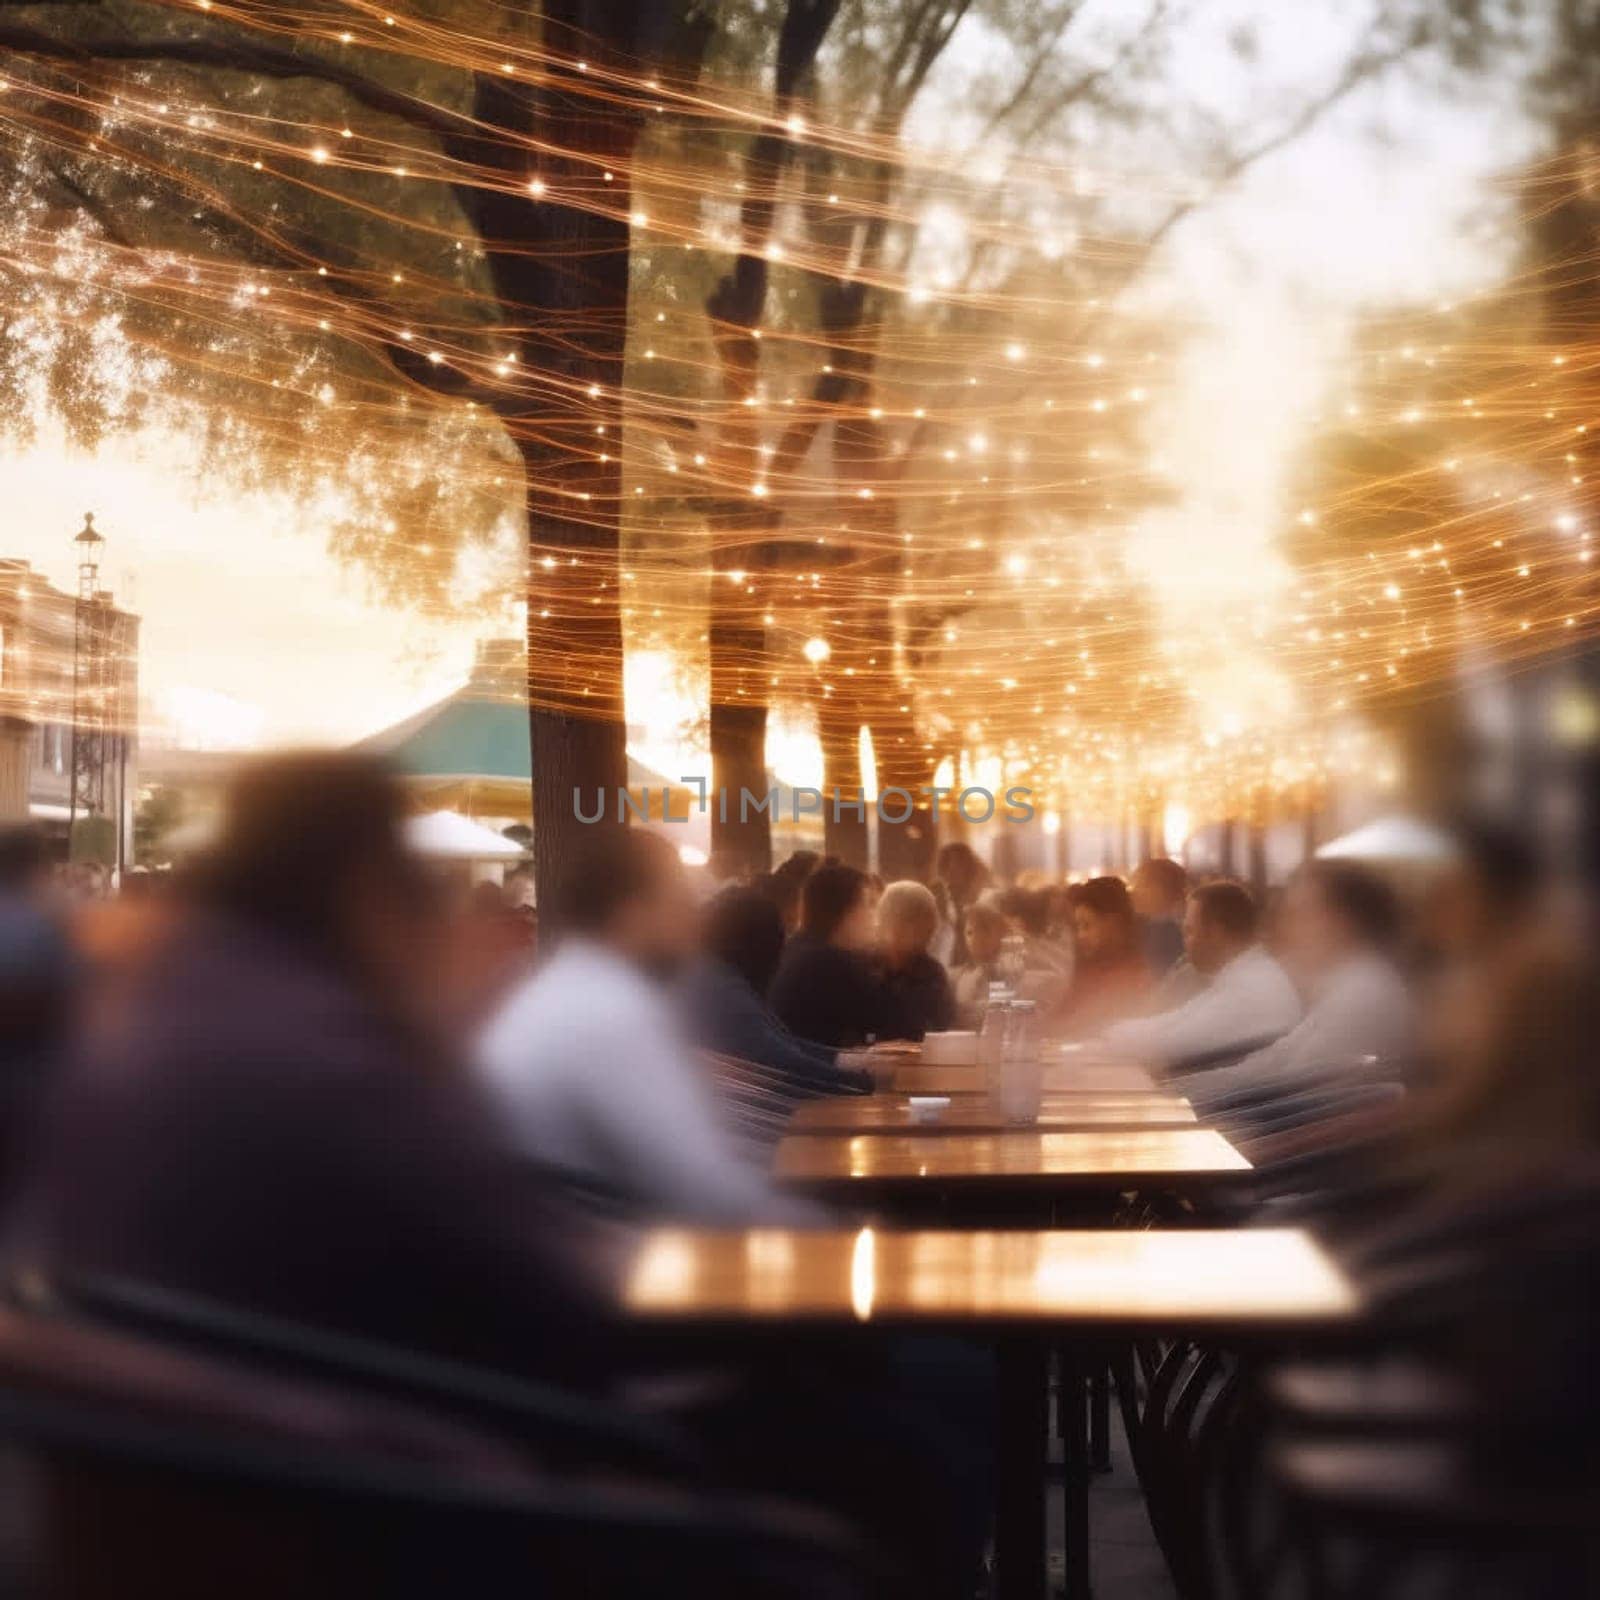 Blurred image of a street cafe or bar in the light of evening lights. In summer people sit at cafe tables.